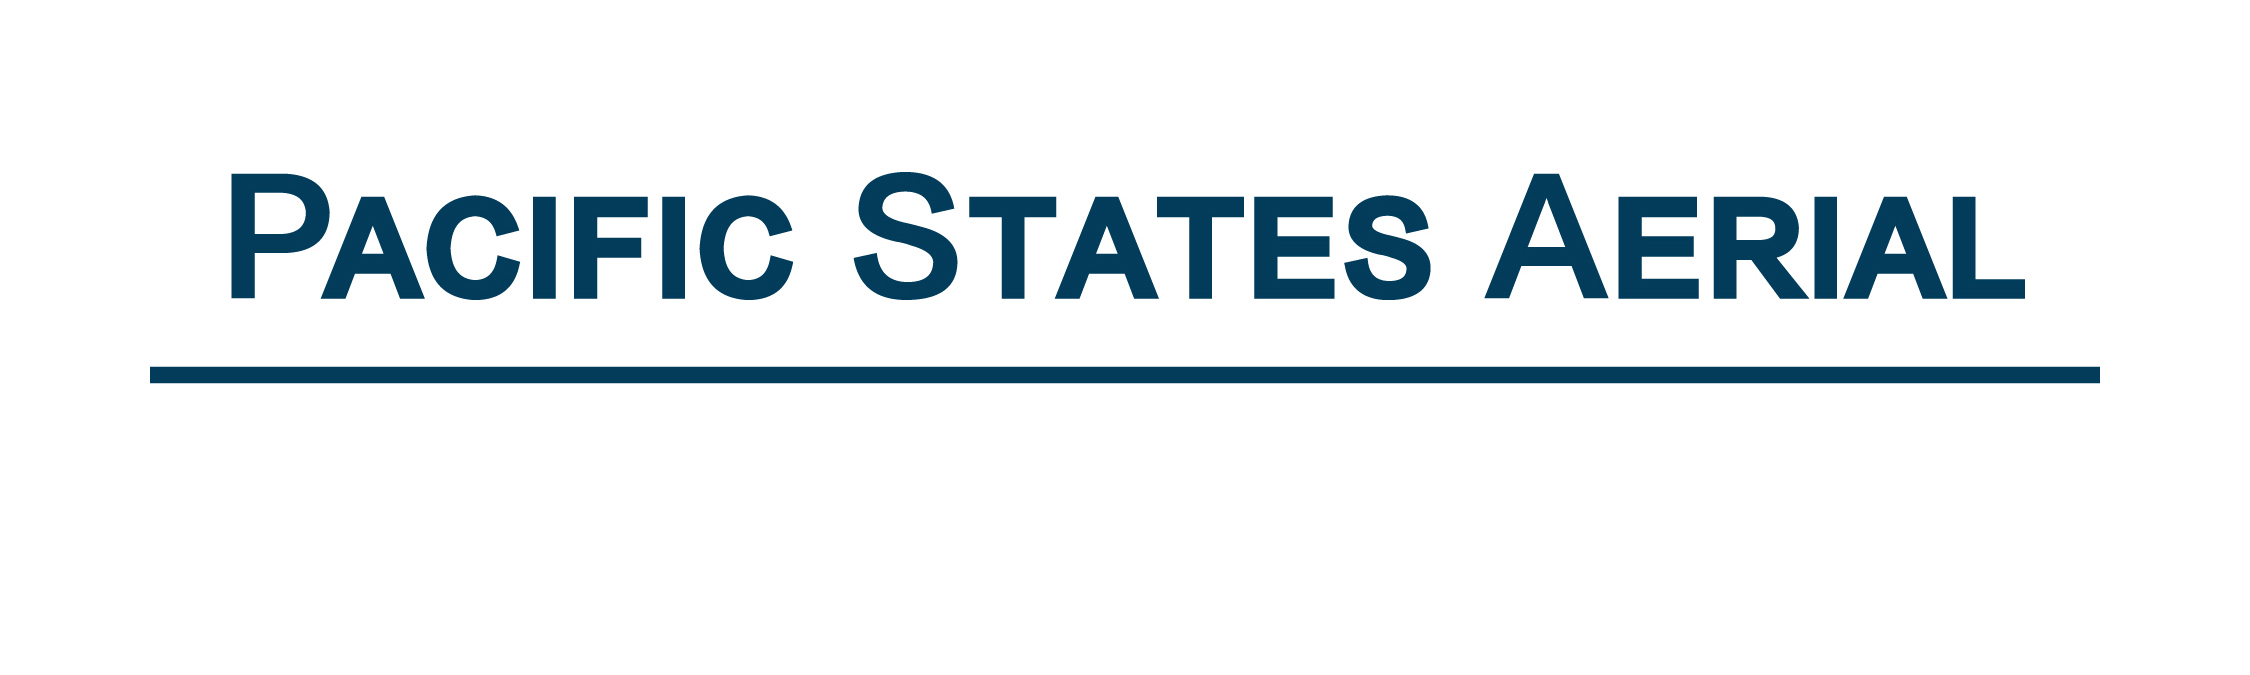 Pacific States Aerial logo